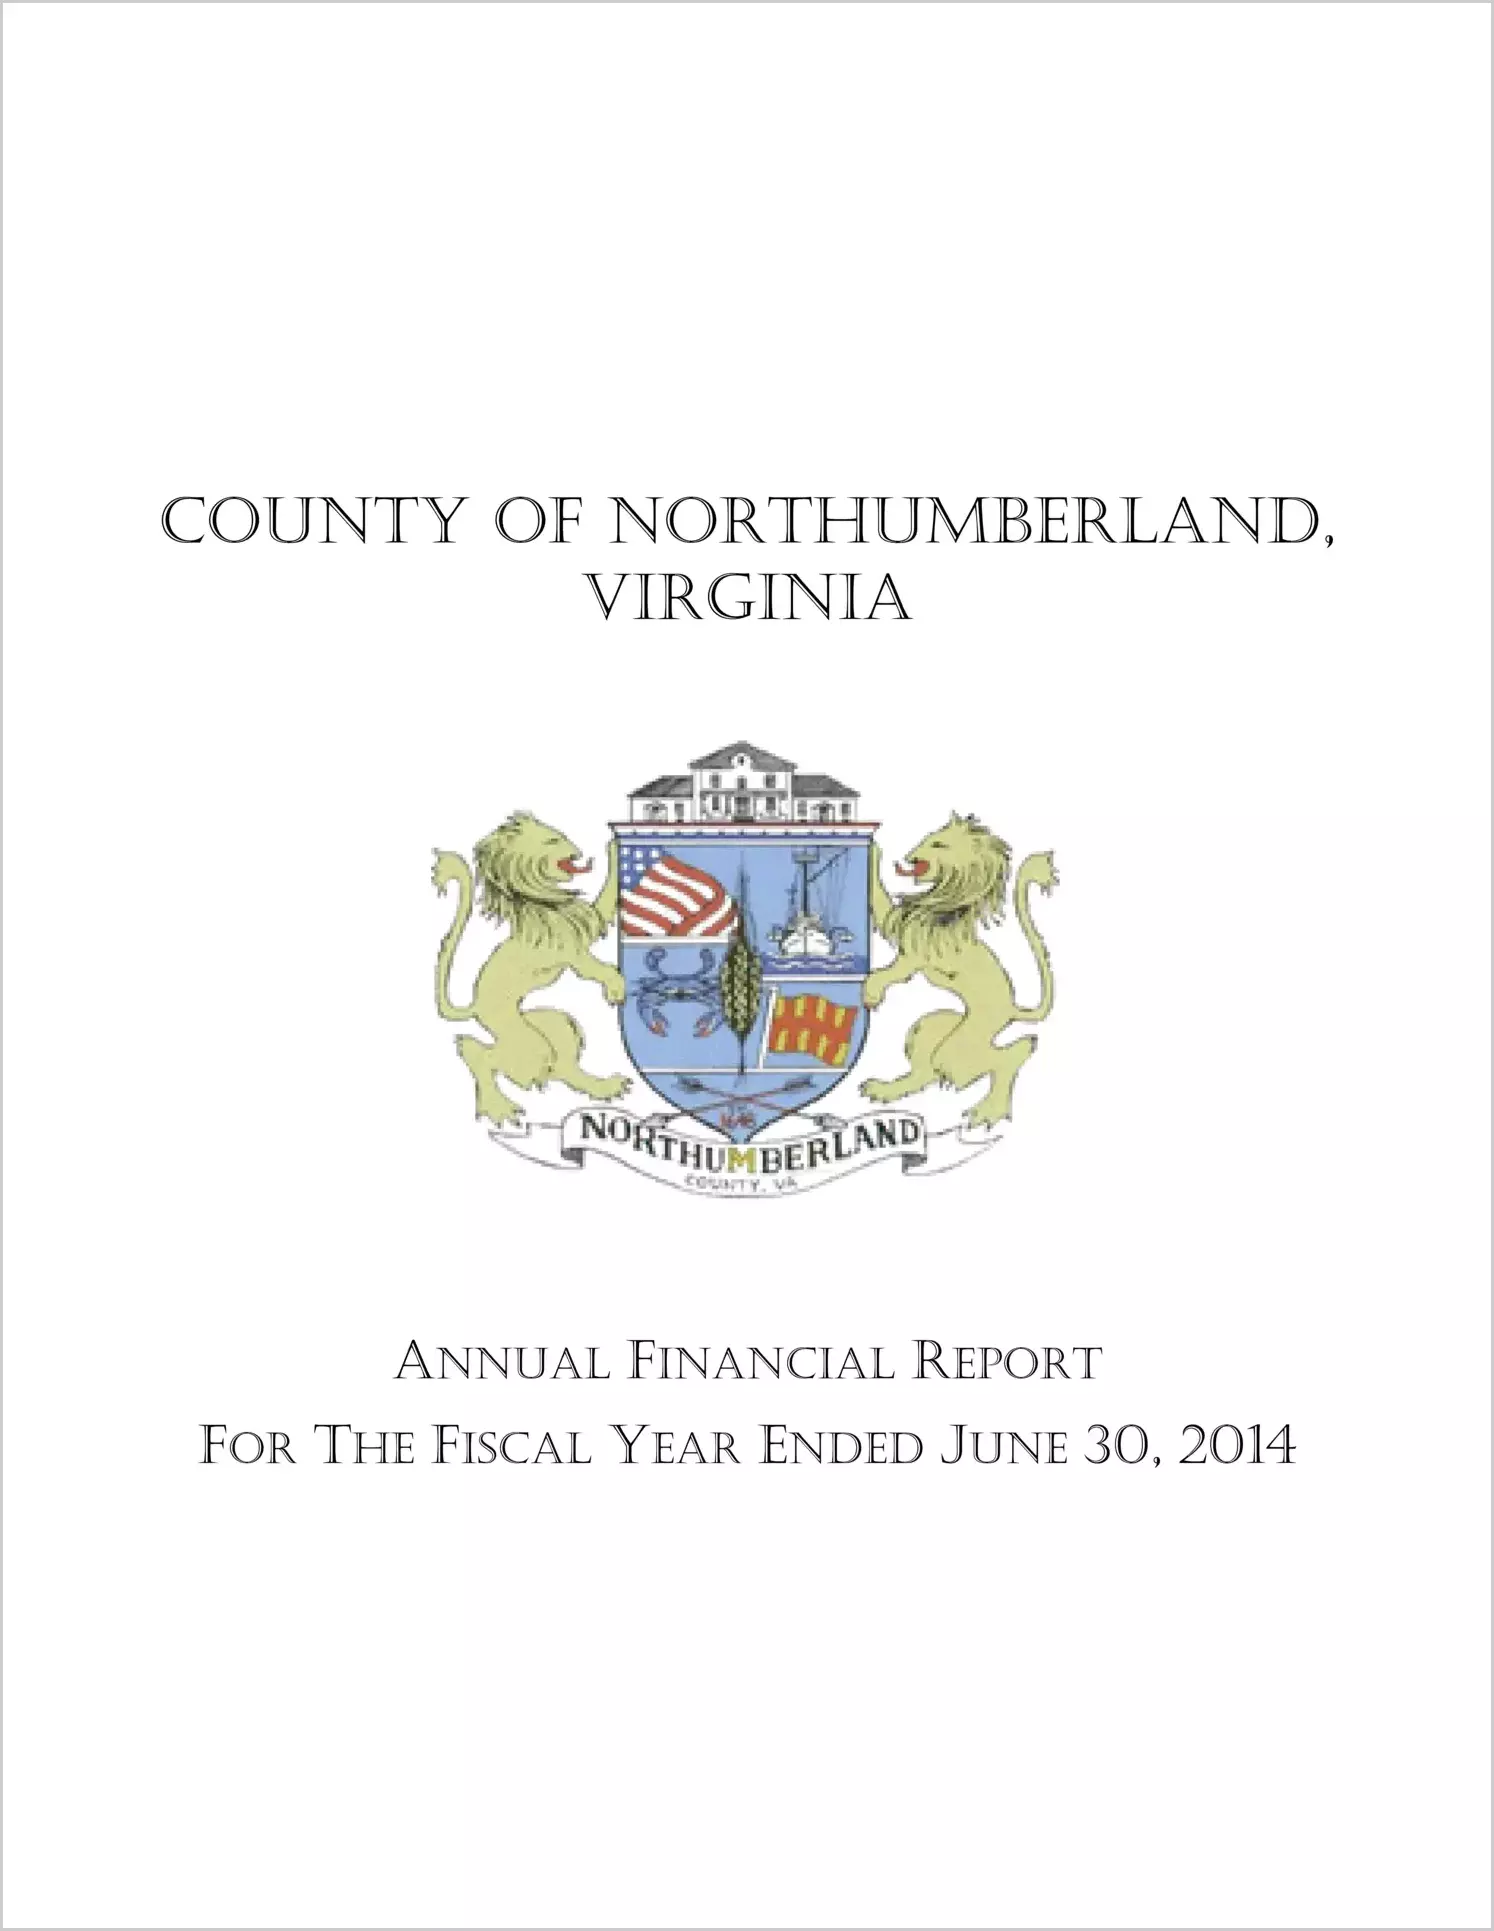 2014 Annual Financial Report for County of Northumberland